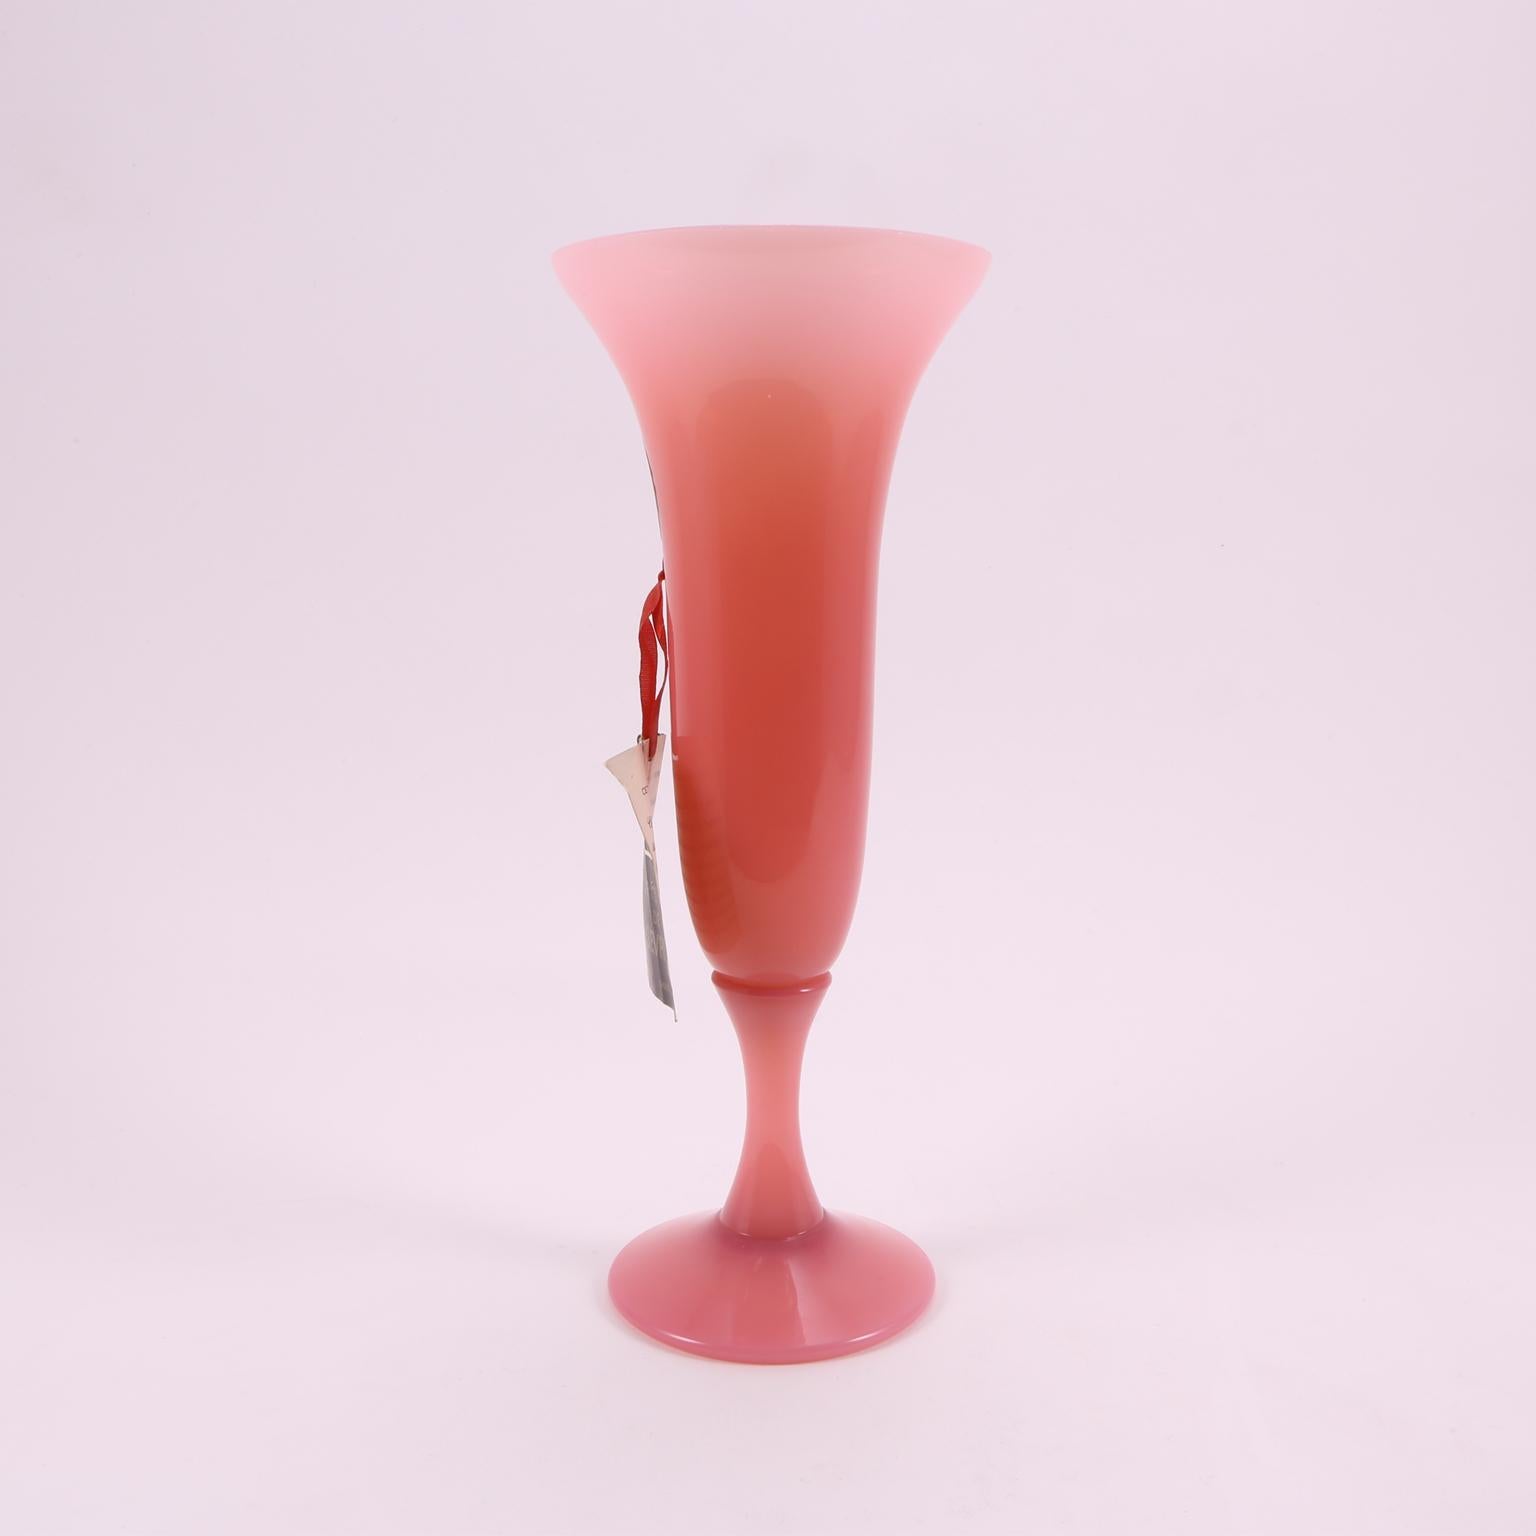 A charming Sèvres cranberry pink opaline vase, handblown in France, with a slender and elegant body.
Handblown in France with original ribbon and label, that are in perfect shape and on the backward of the card you will find a description of the